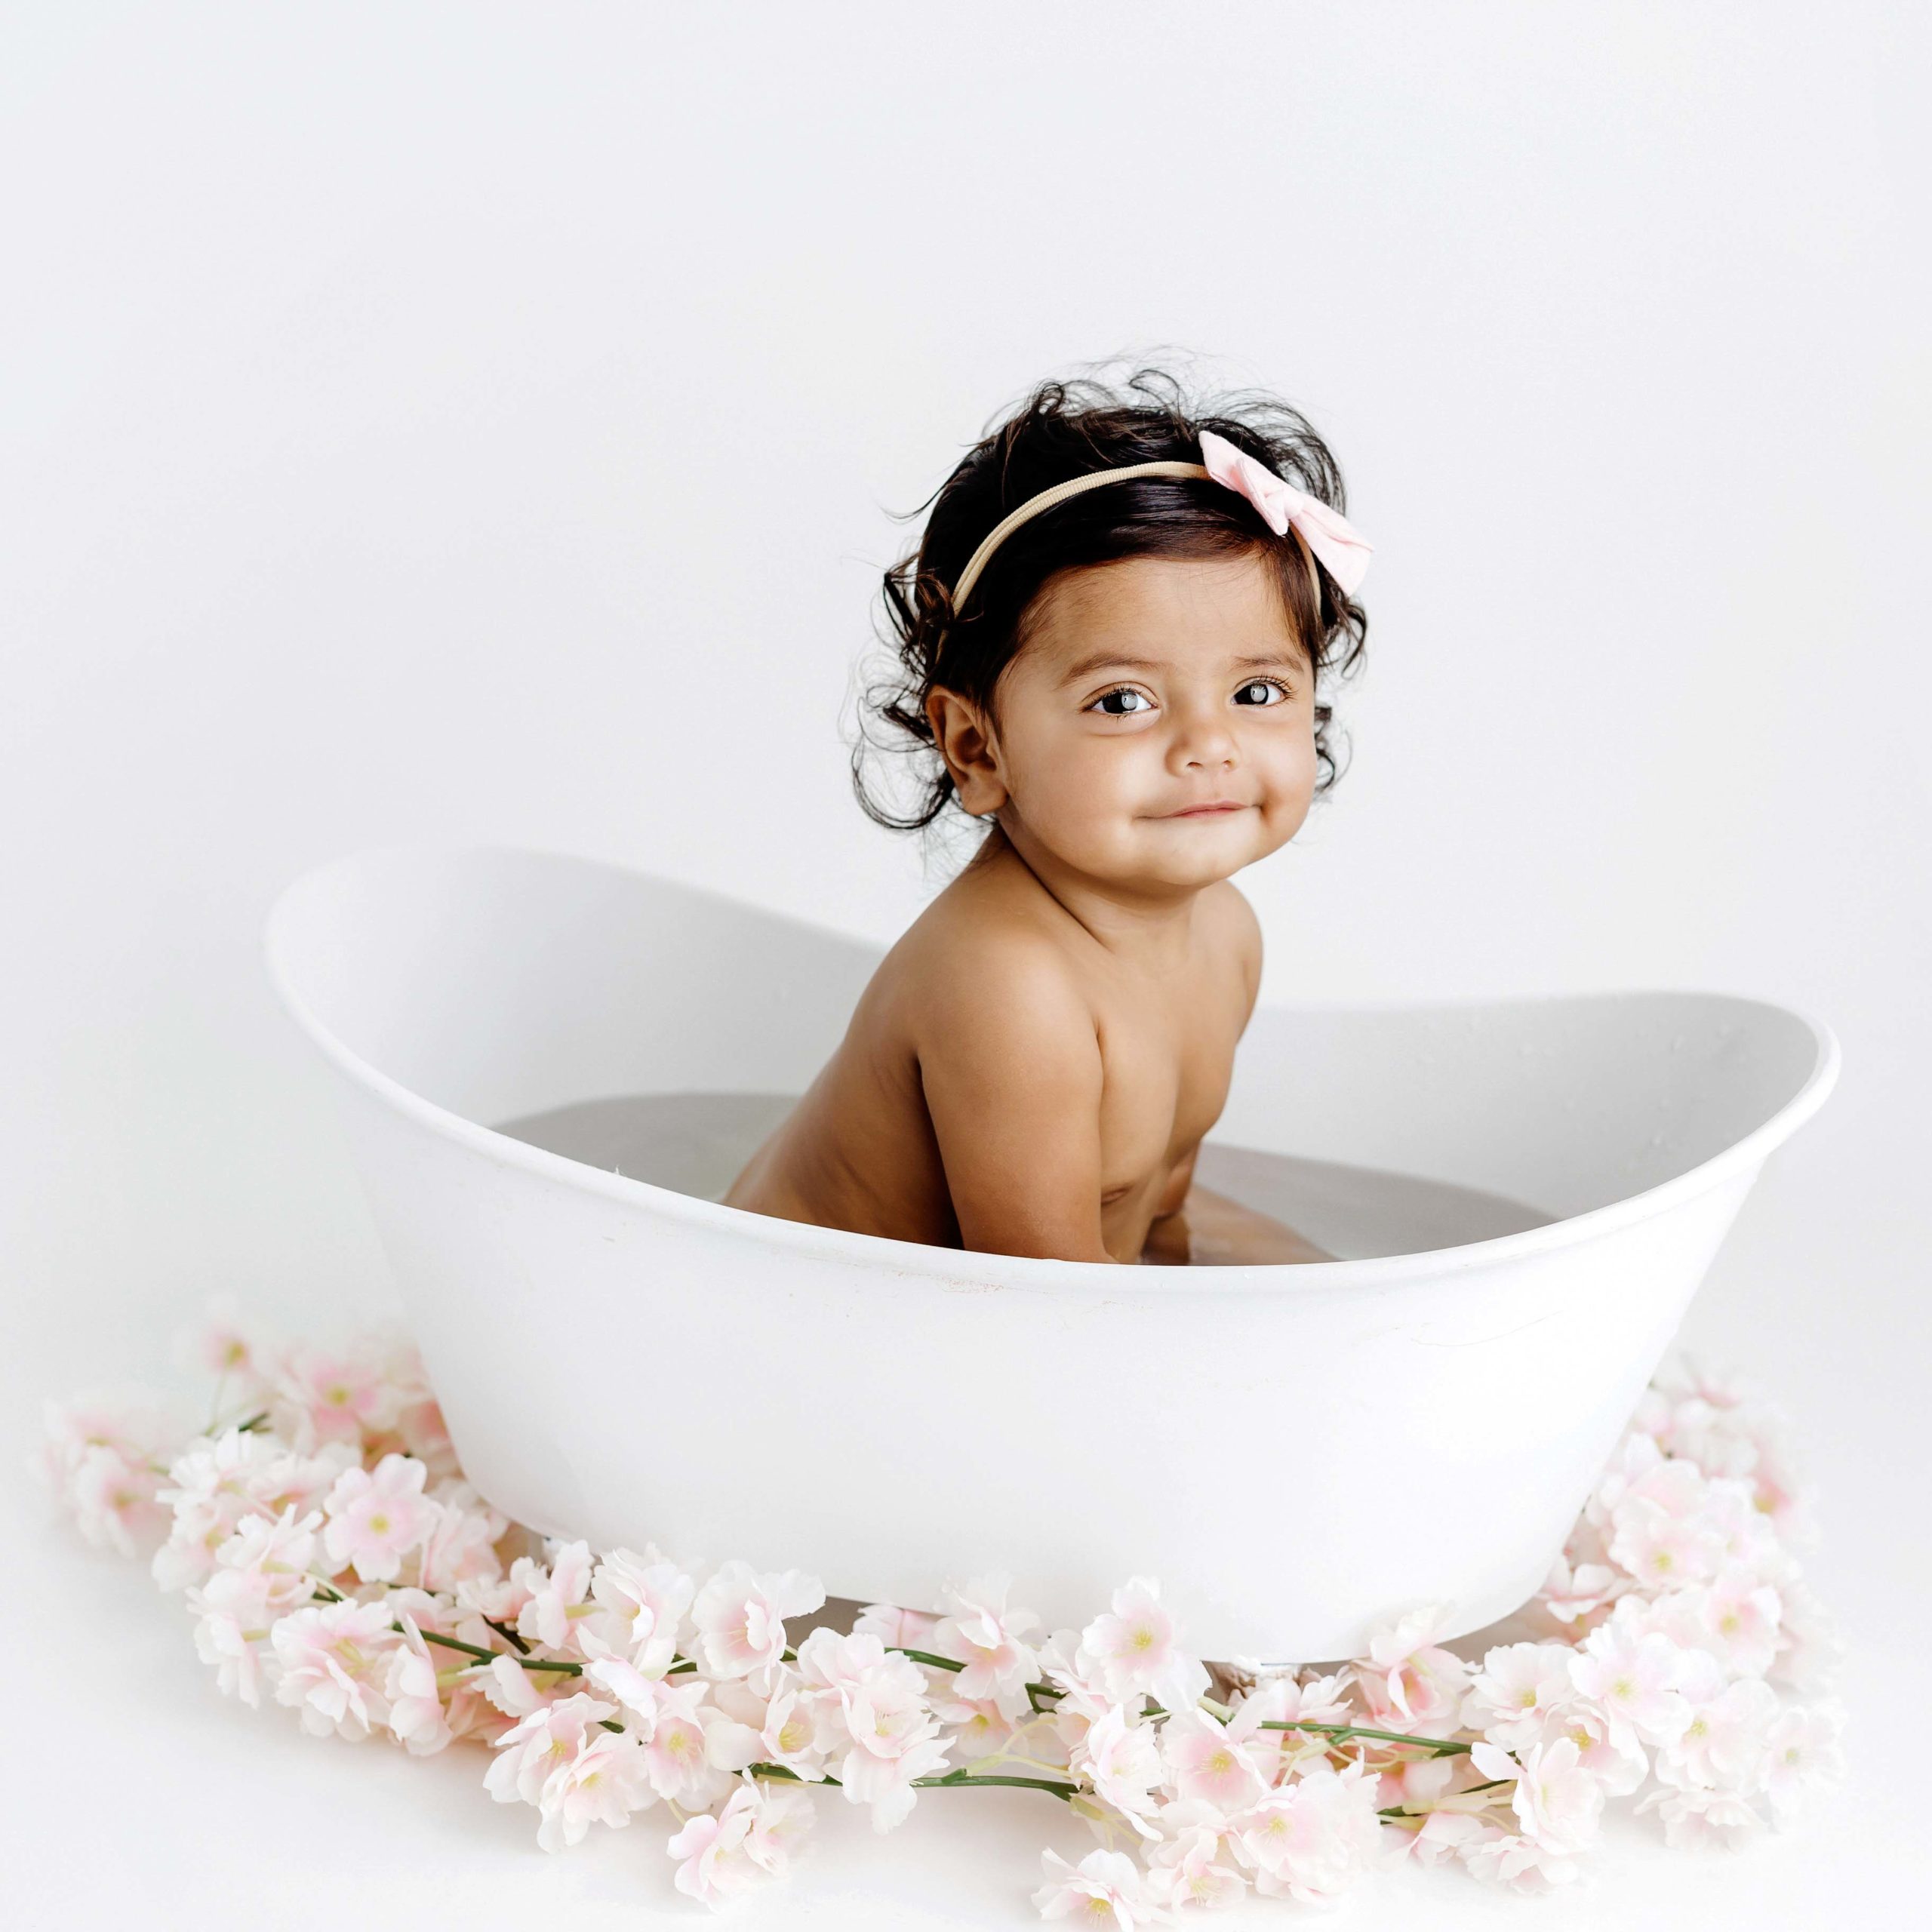 baby in tub